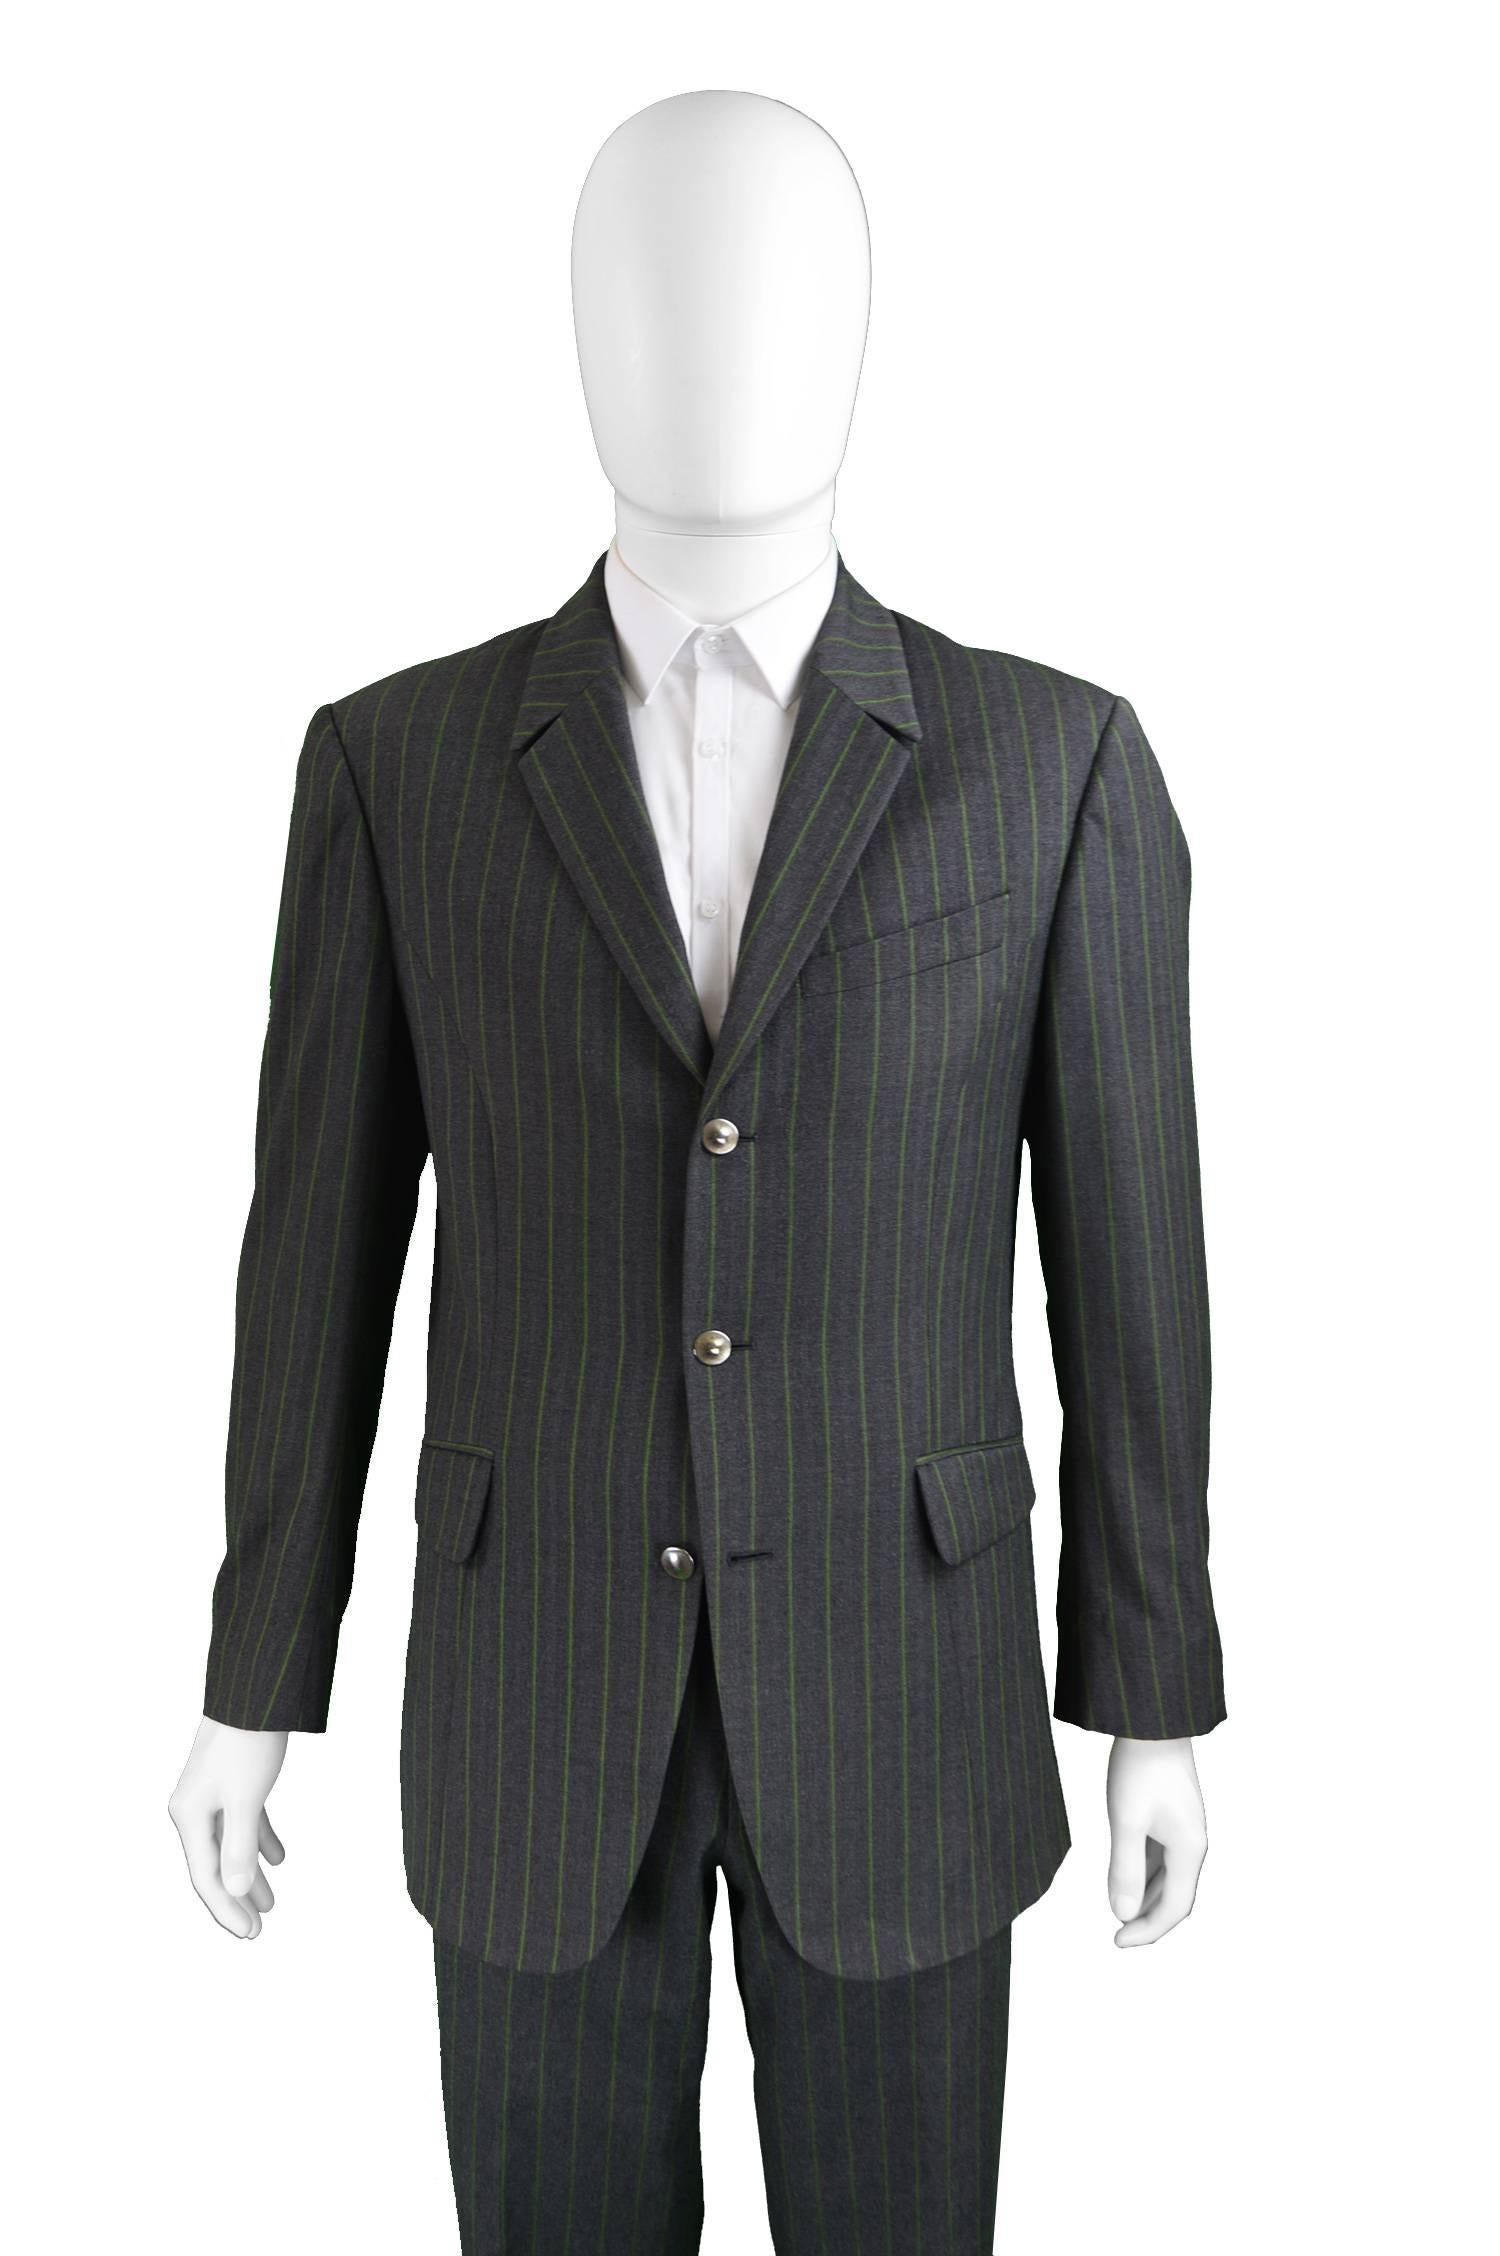 Thierry Mugler Men's Grey & Green Pinstripe Wool Blazer& Pants Suit

Size: Both pieces are Marked 50R which is roughly a men's Medium / UK 40. 
Jacket
Chest -  42” / 106cm (please leave a couple of inches room for movement)
Length (Shoulder